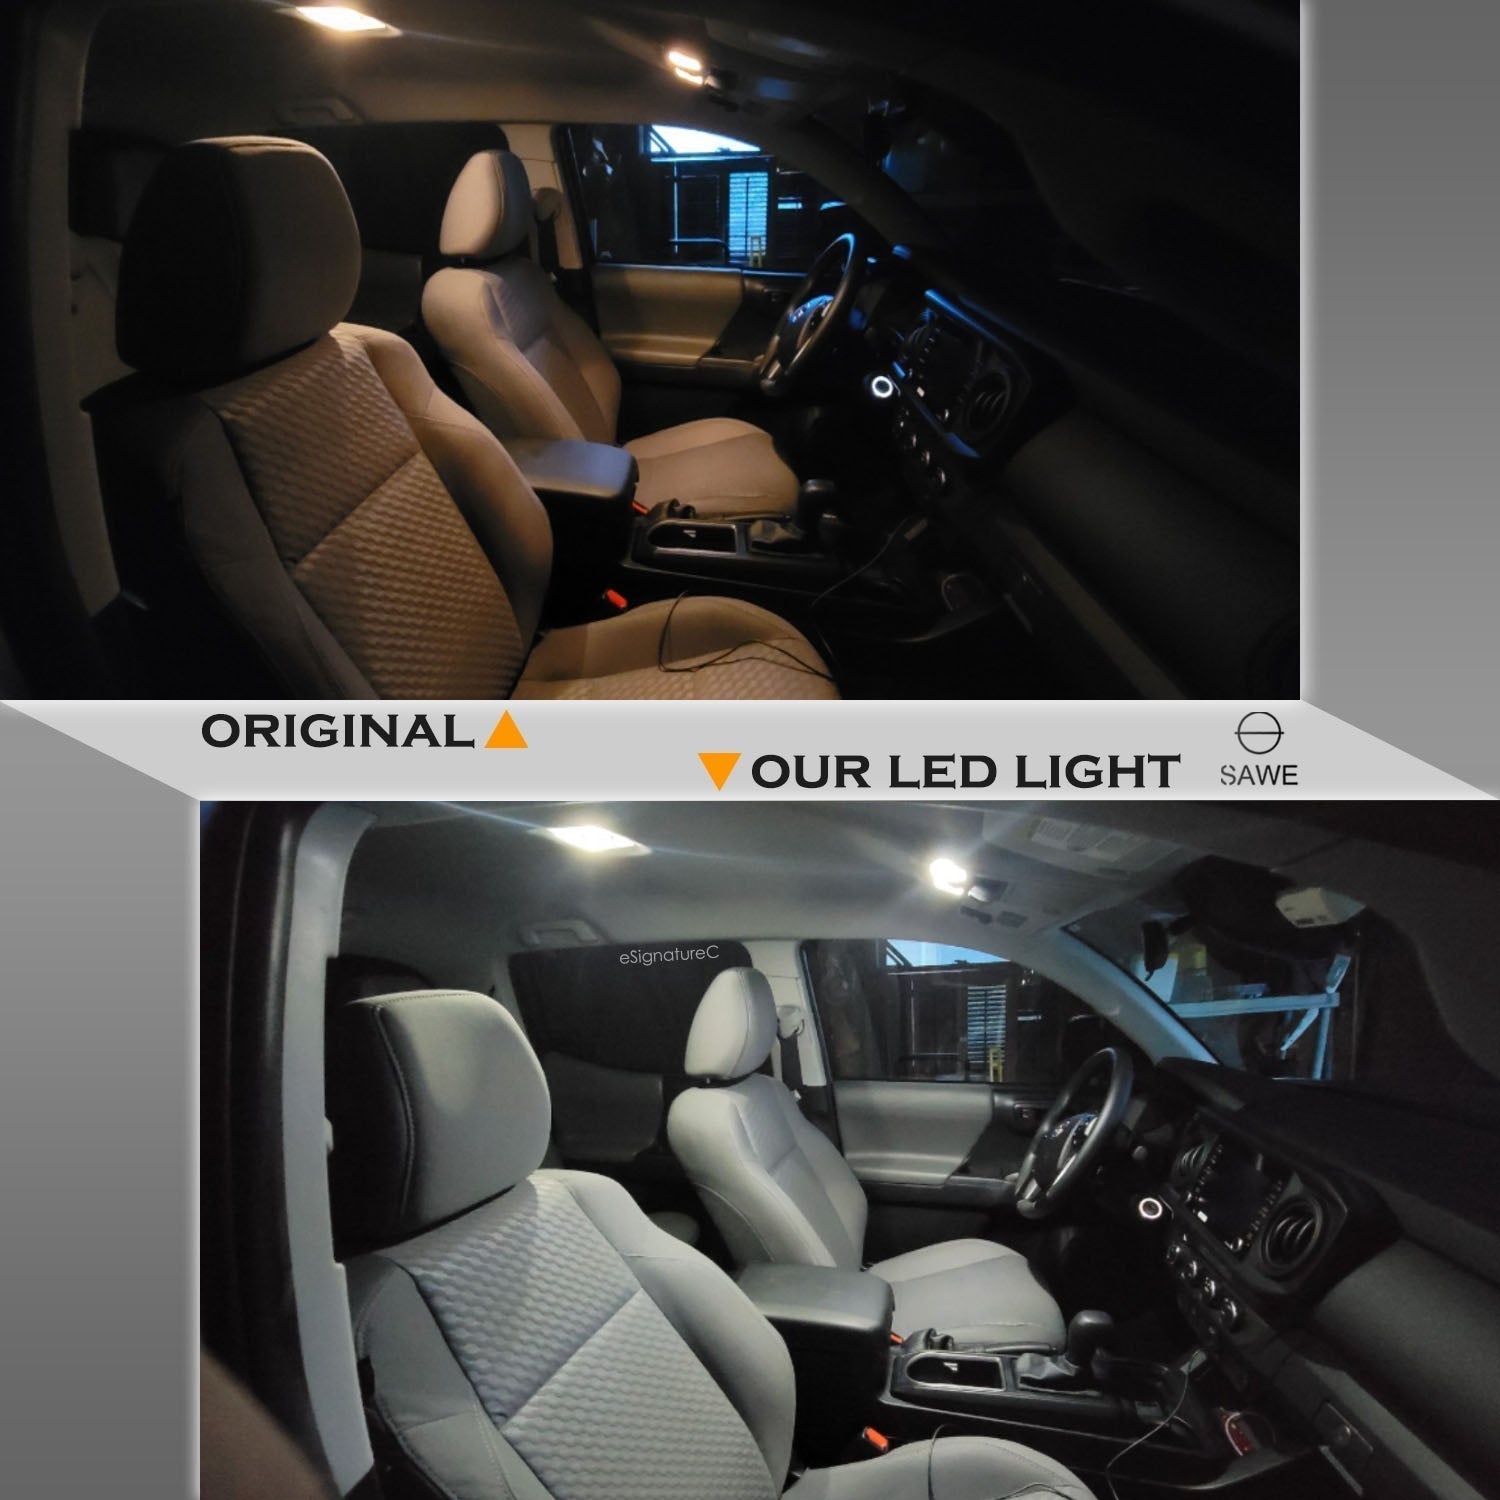 For Toyota Venza Interior LED Lights - Dome & Map Lights Package Kit for 2009 - 2016 - White